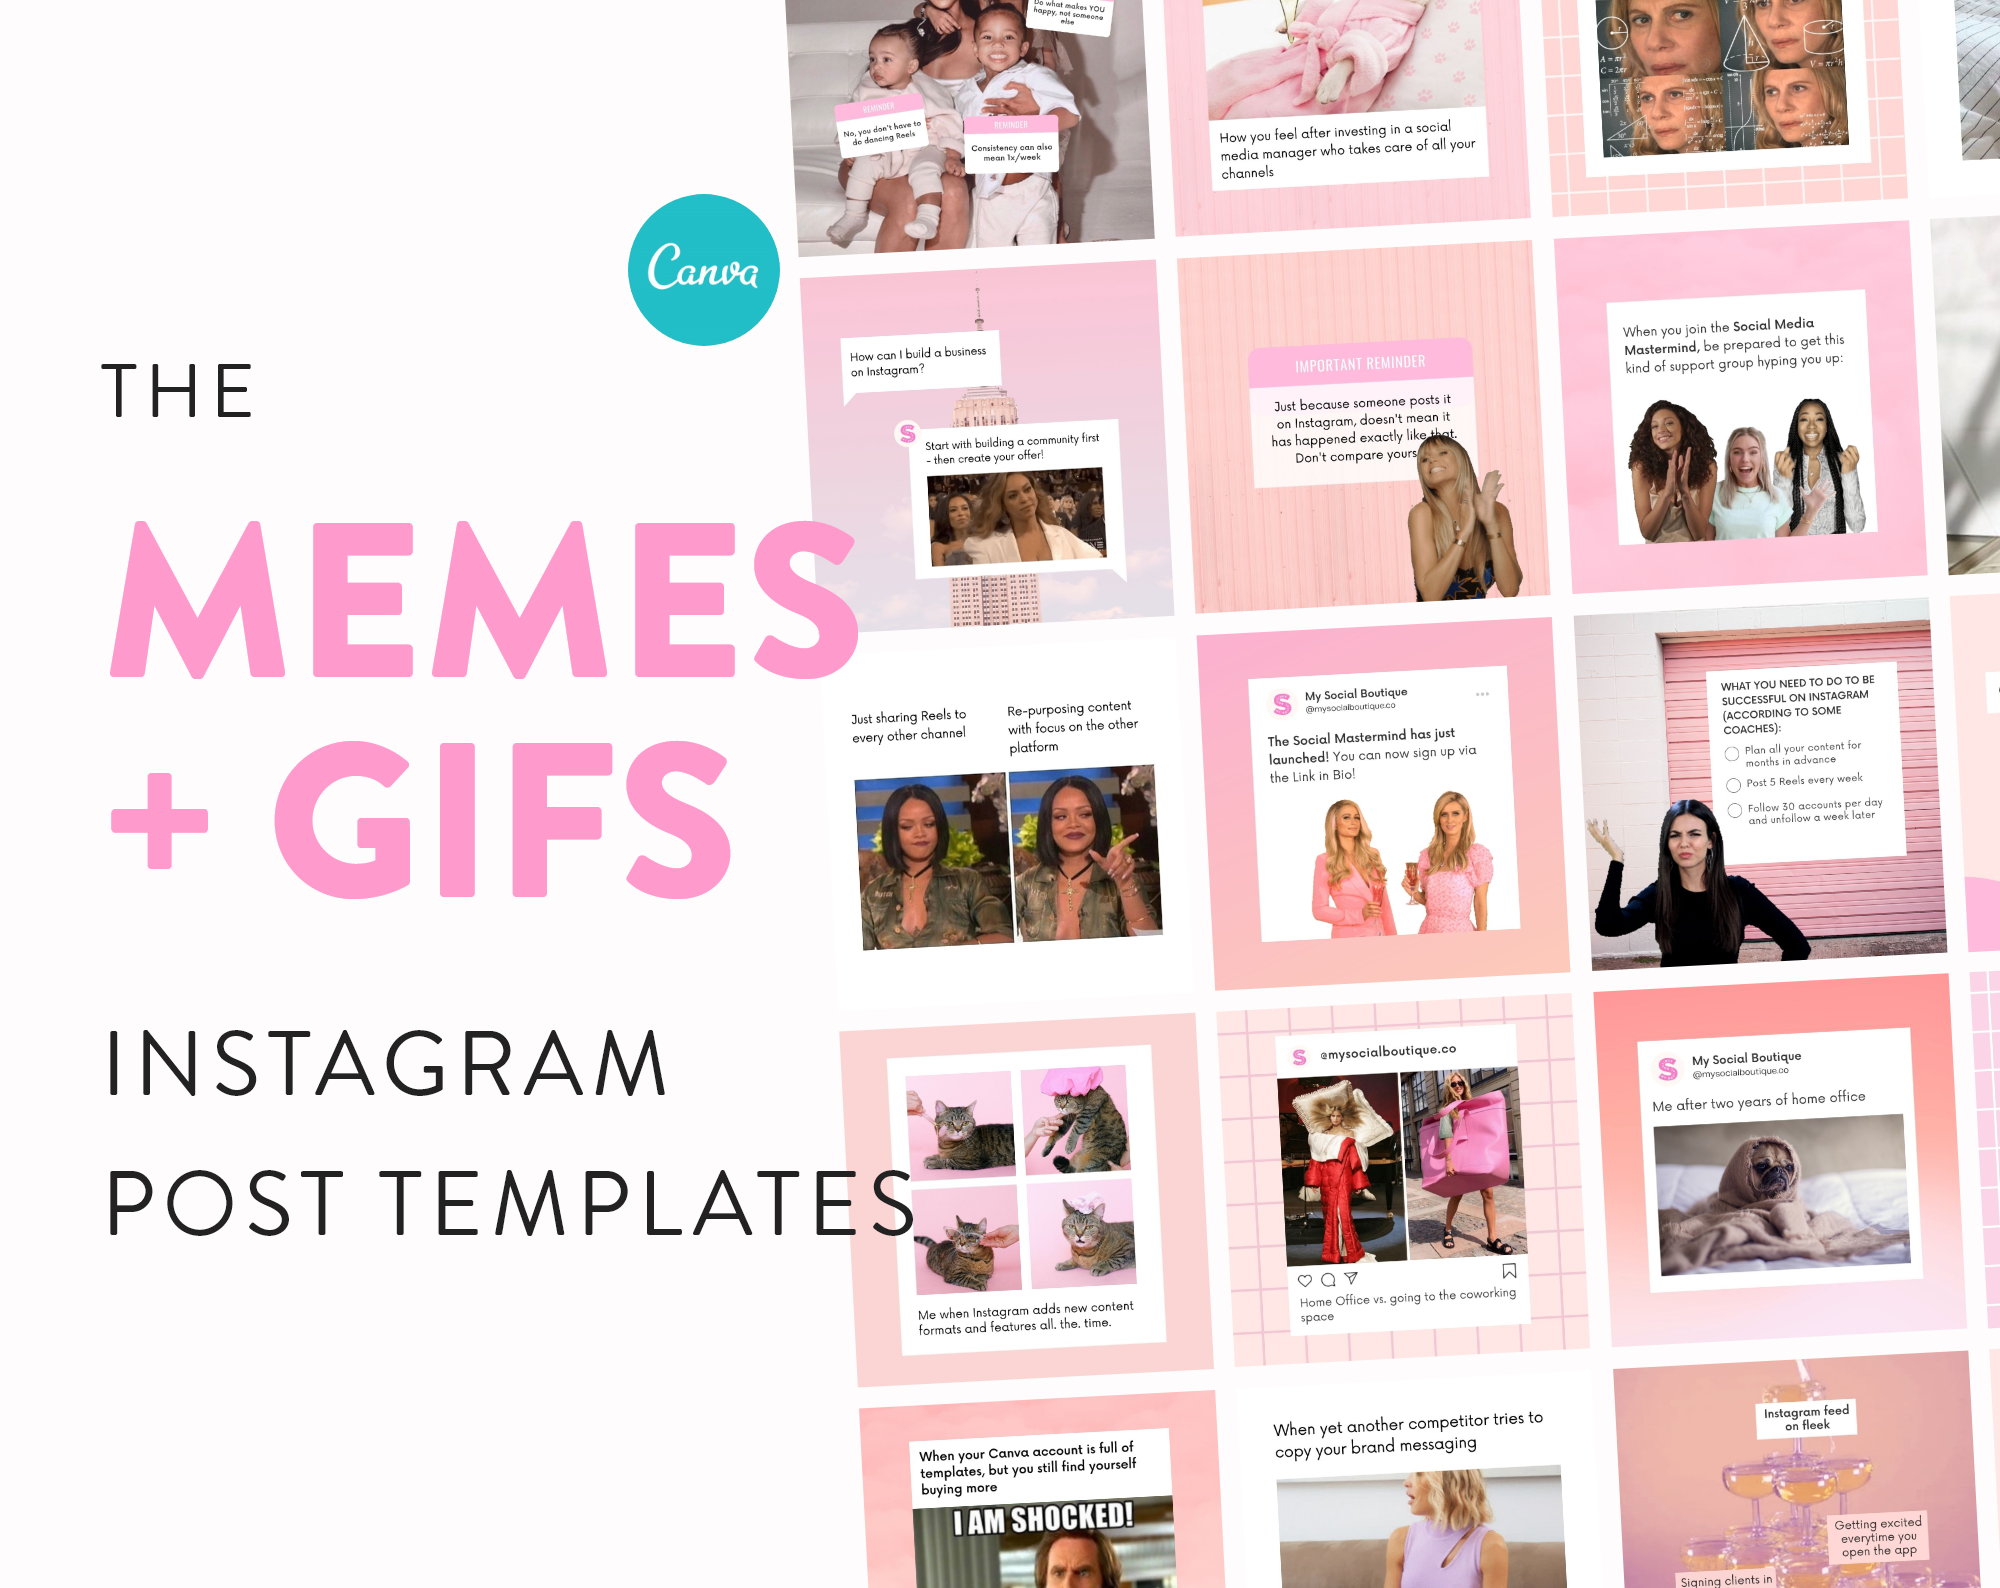 memes-gifs-Instagram-feed-post-templates-canva